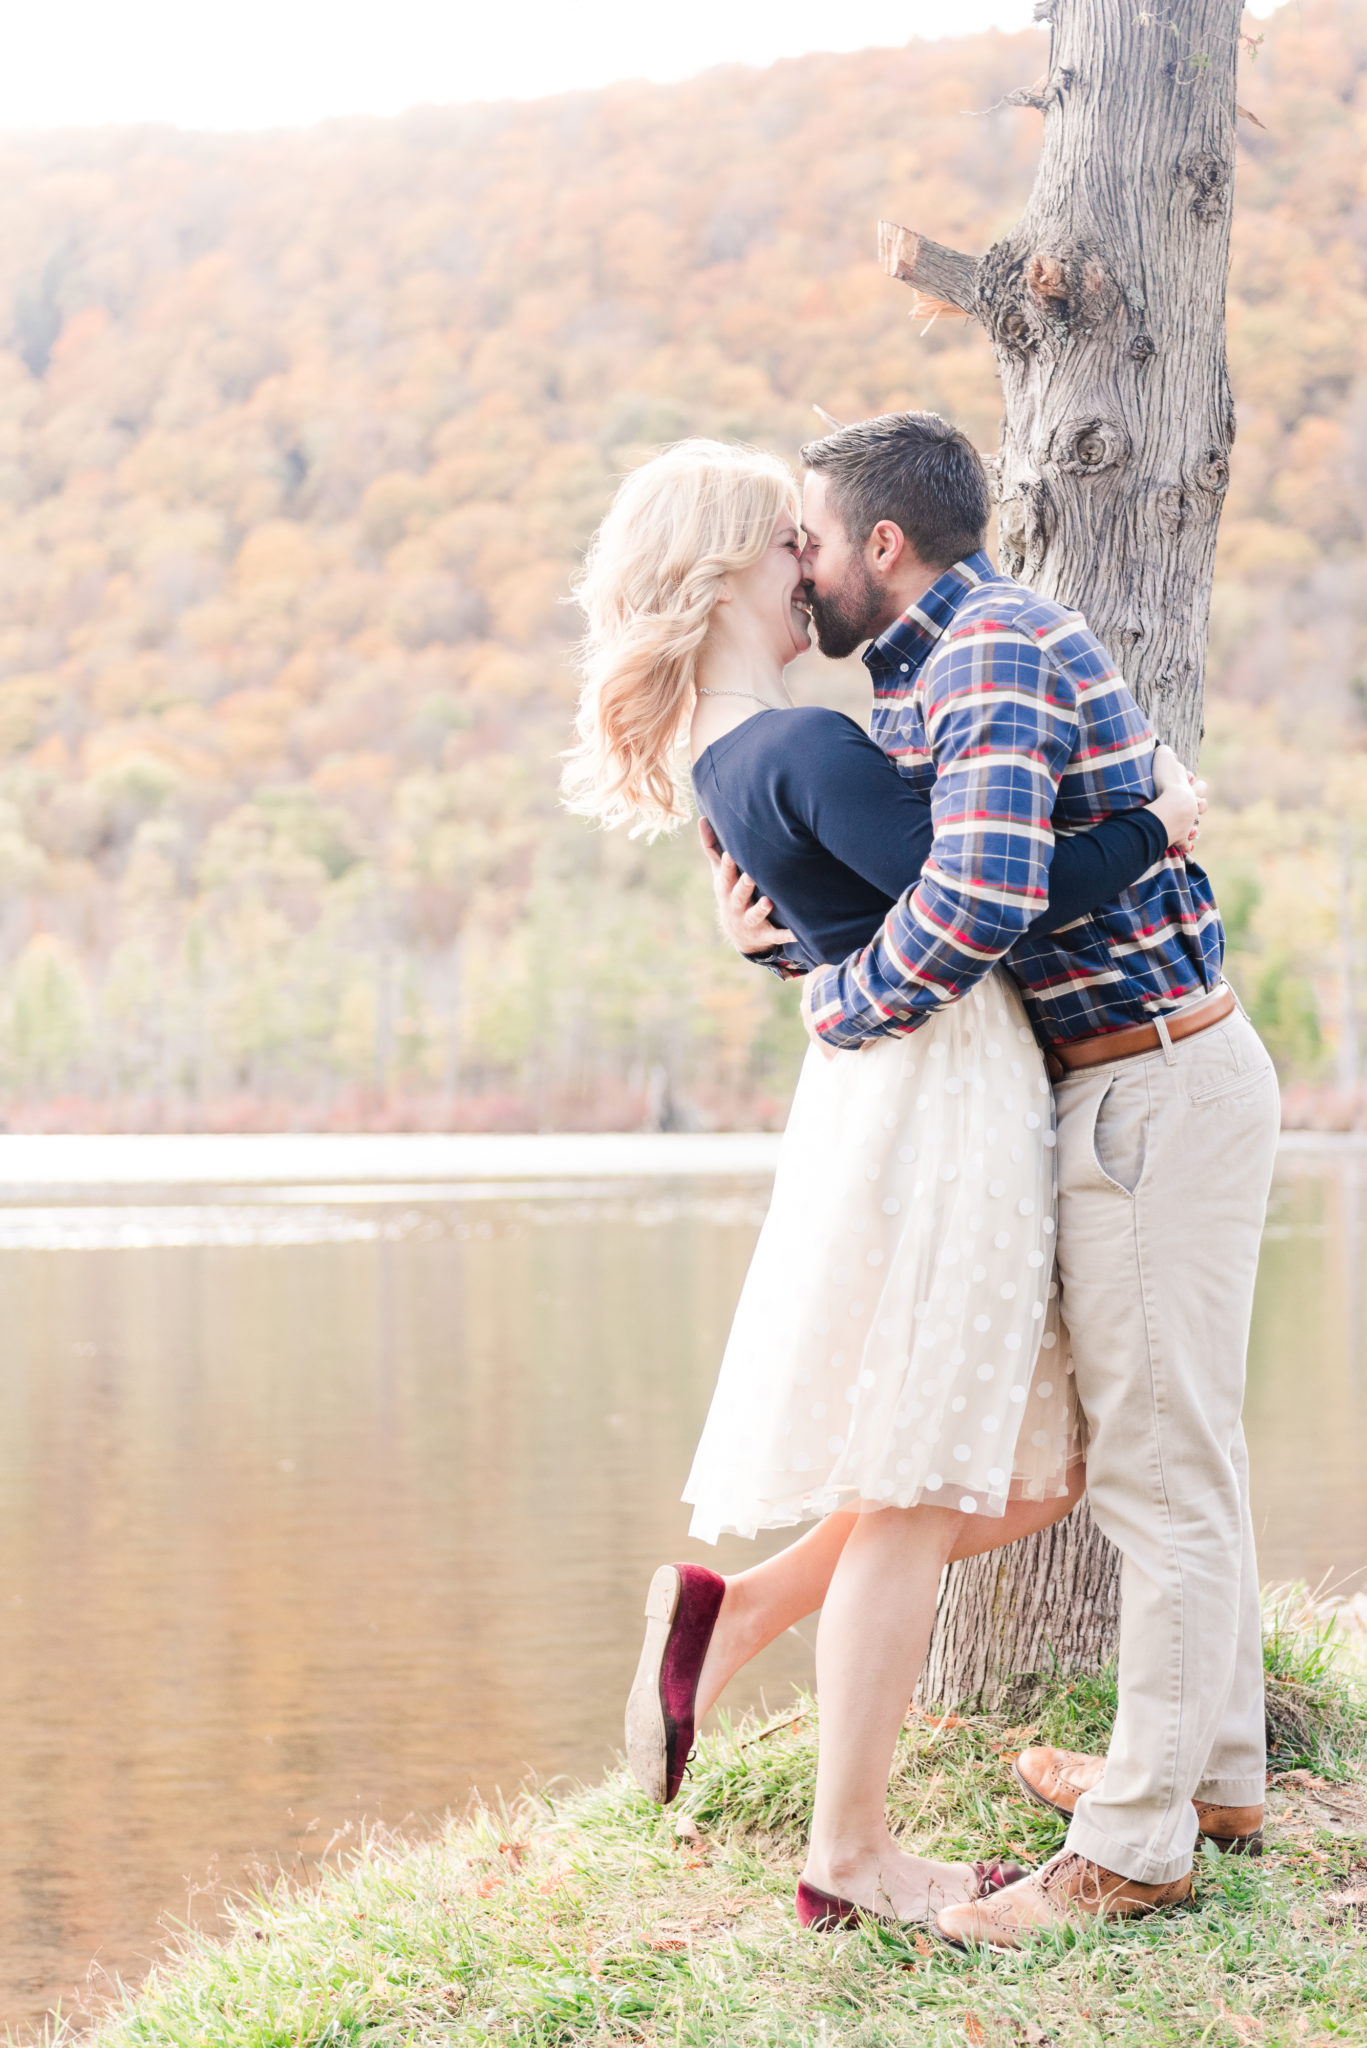 Fall Lakeside Kiss between engaged coupe Greenville, SC Wedding Photographer